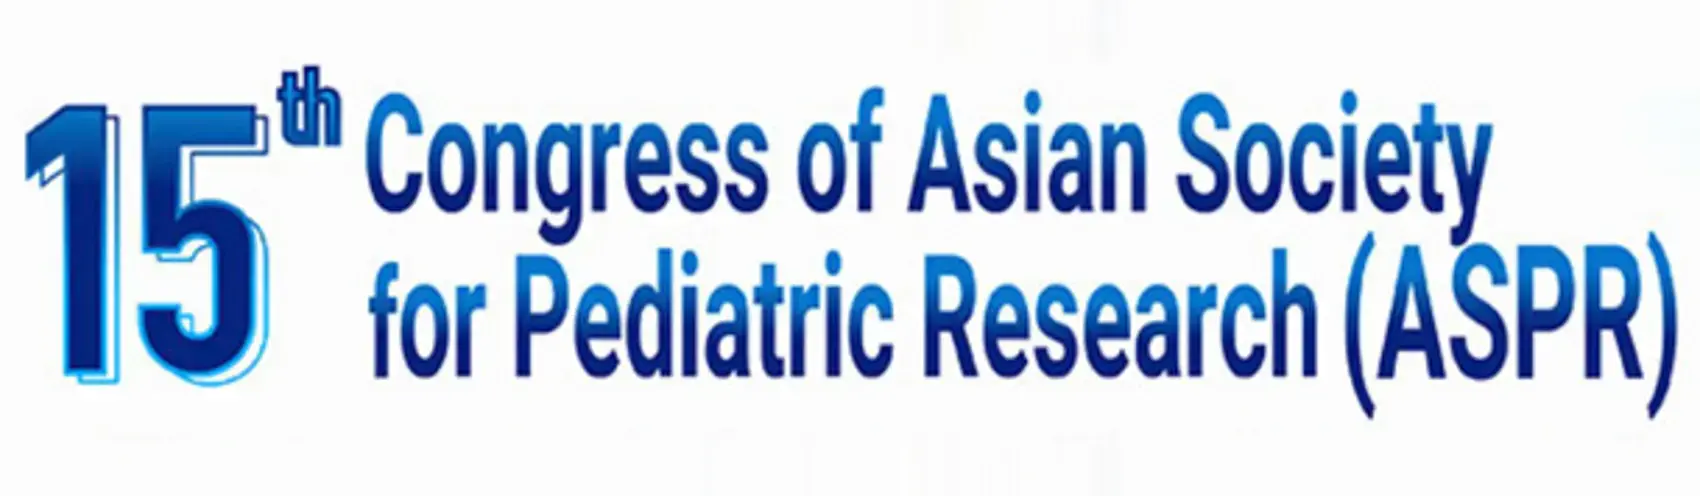 THE 15TH CONGRESS OF ASIAN SOCIETY FOR PEDIATRIC RESEARCH (ASPR)